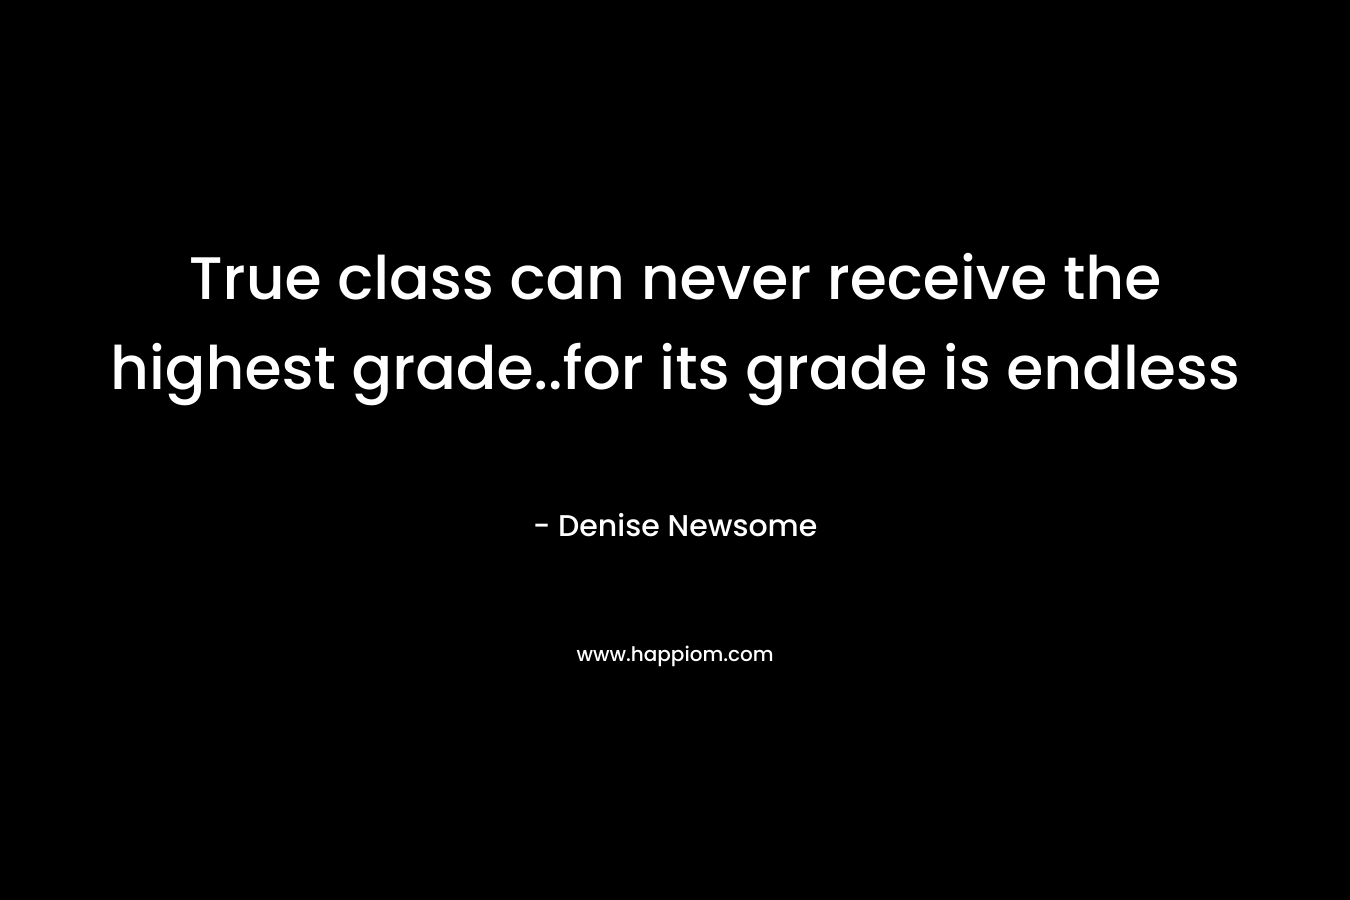 True class can never receive the highest grade..for its grade is endless